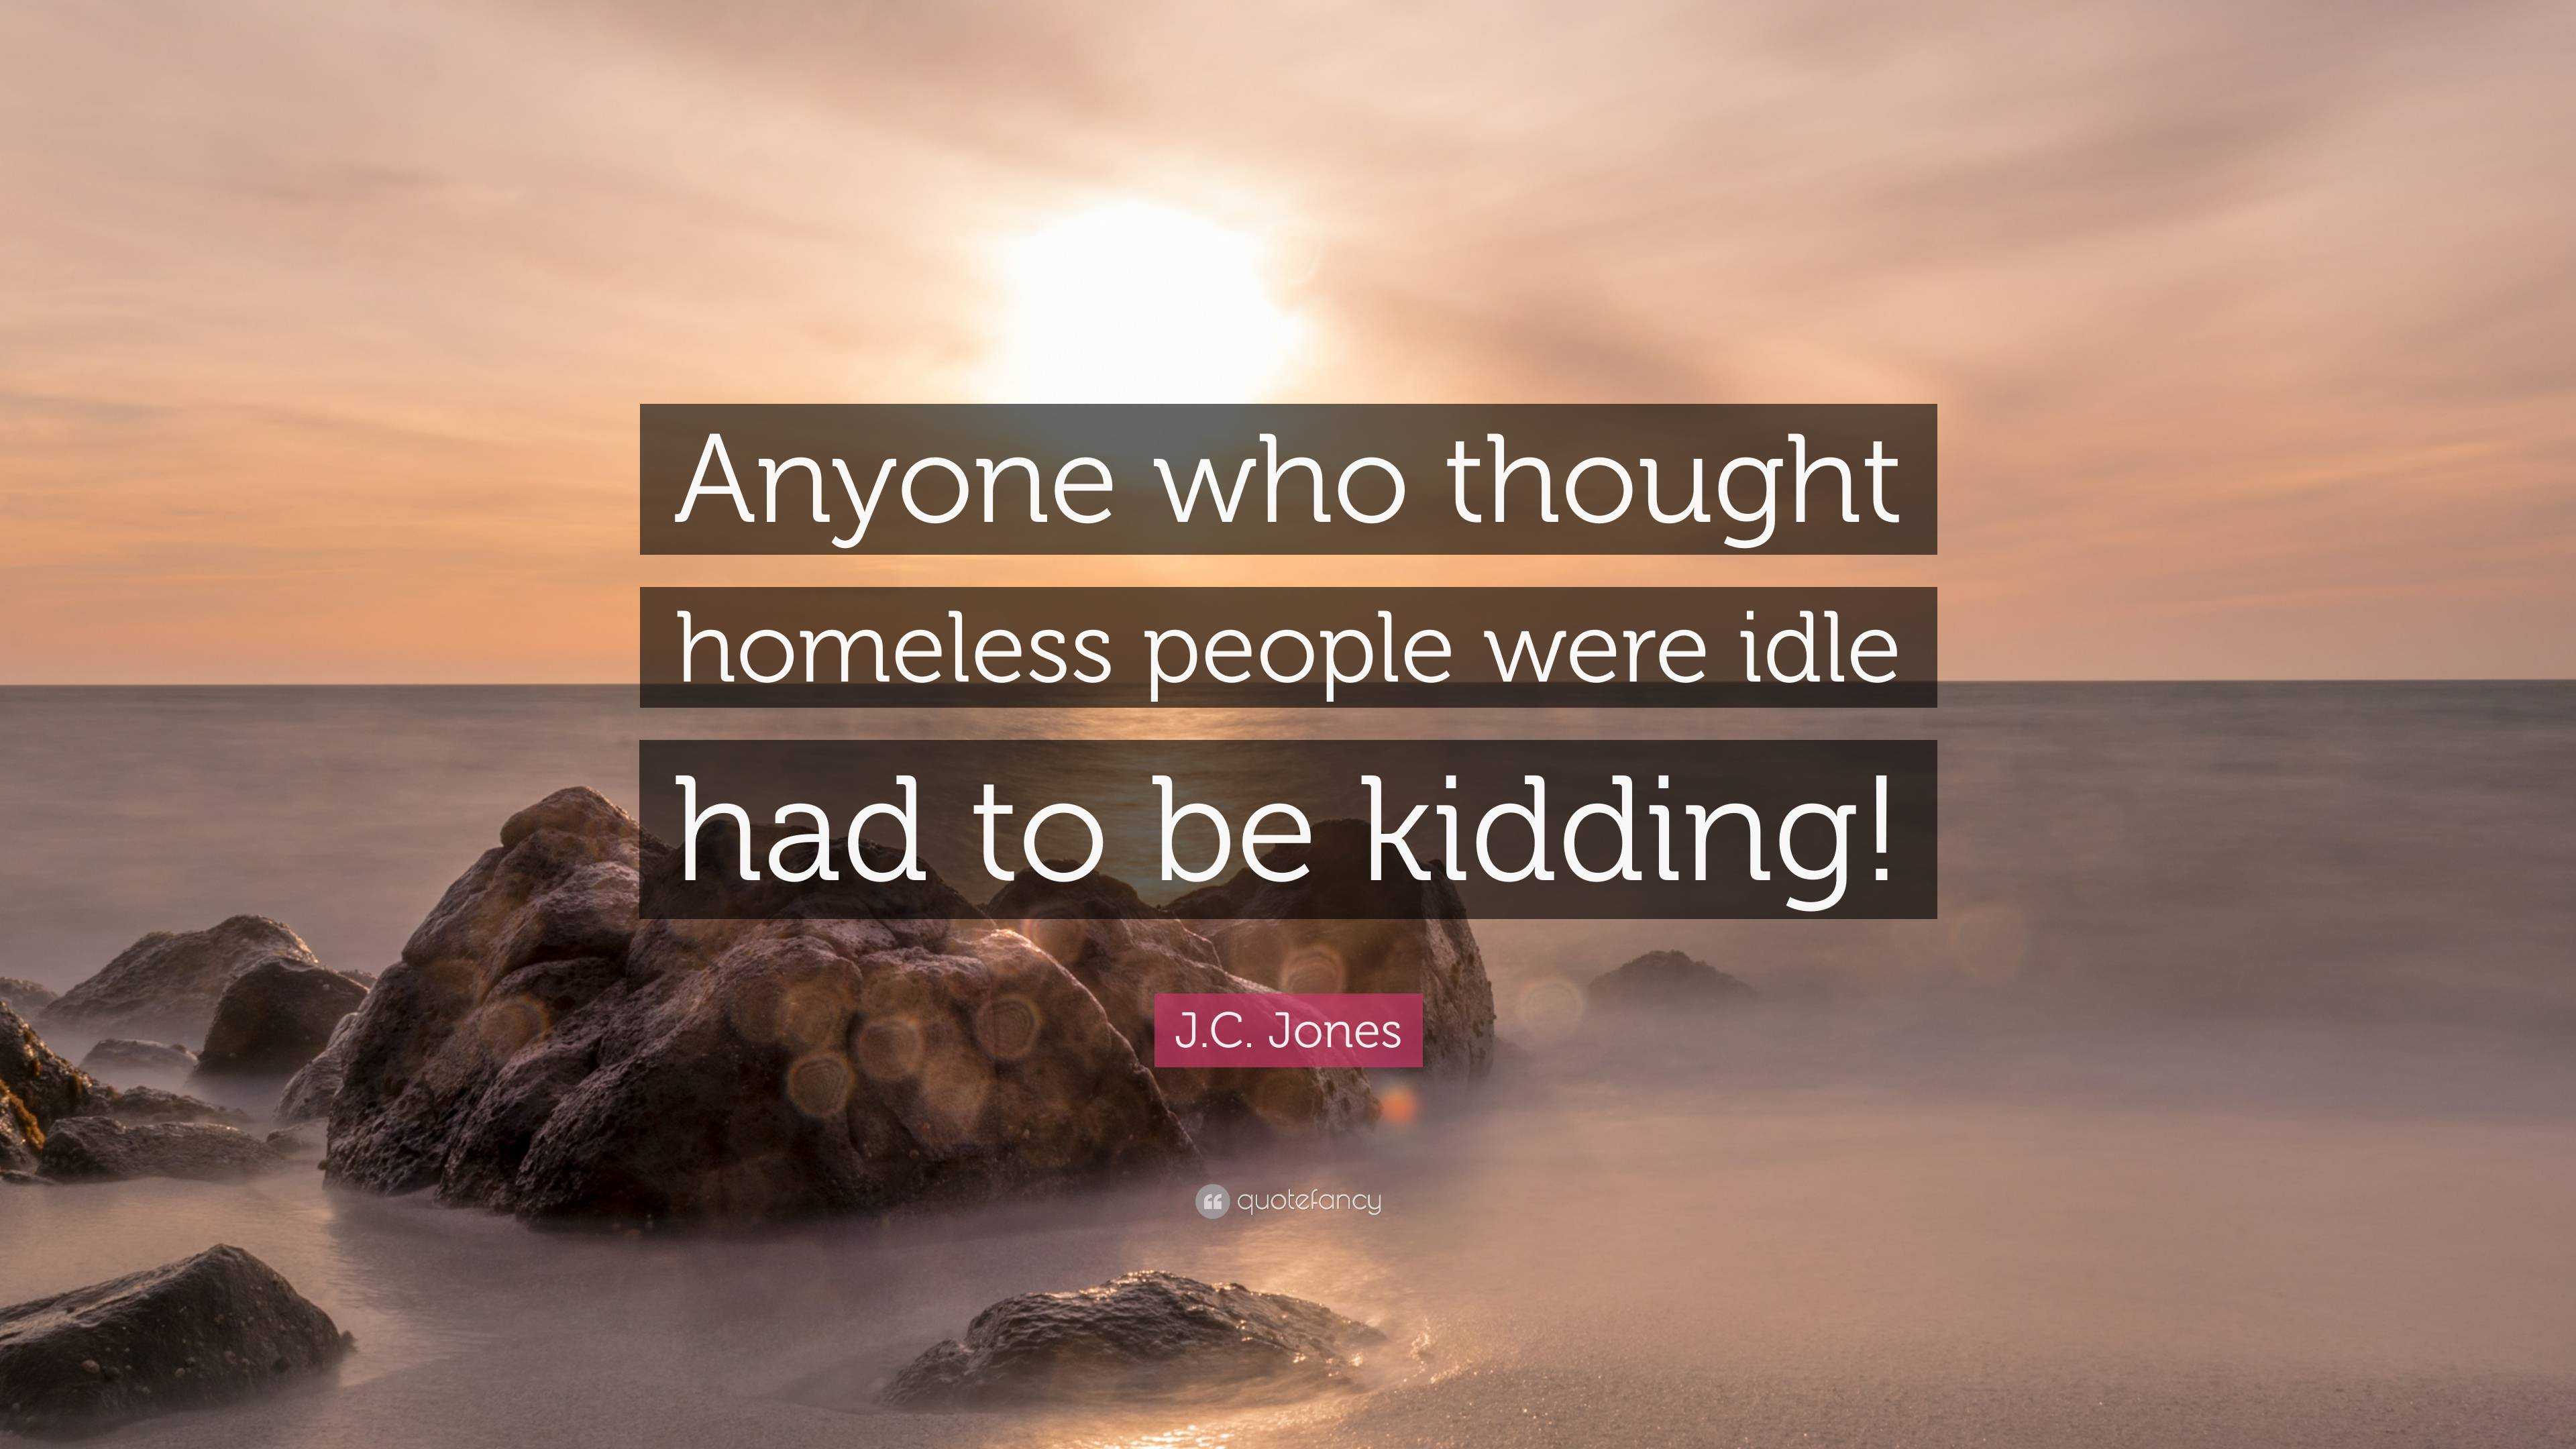 helping homeless people quotes